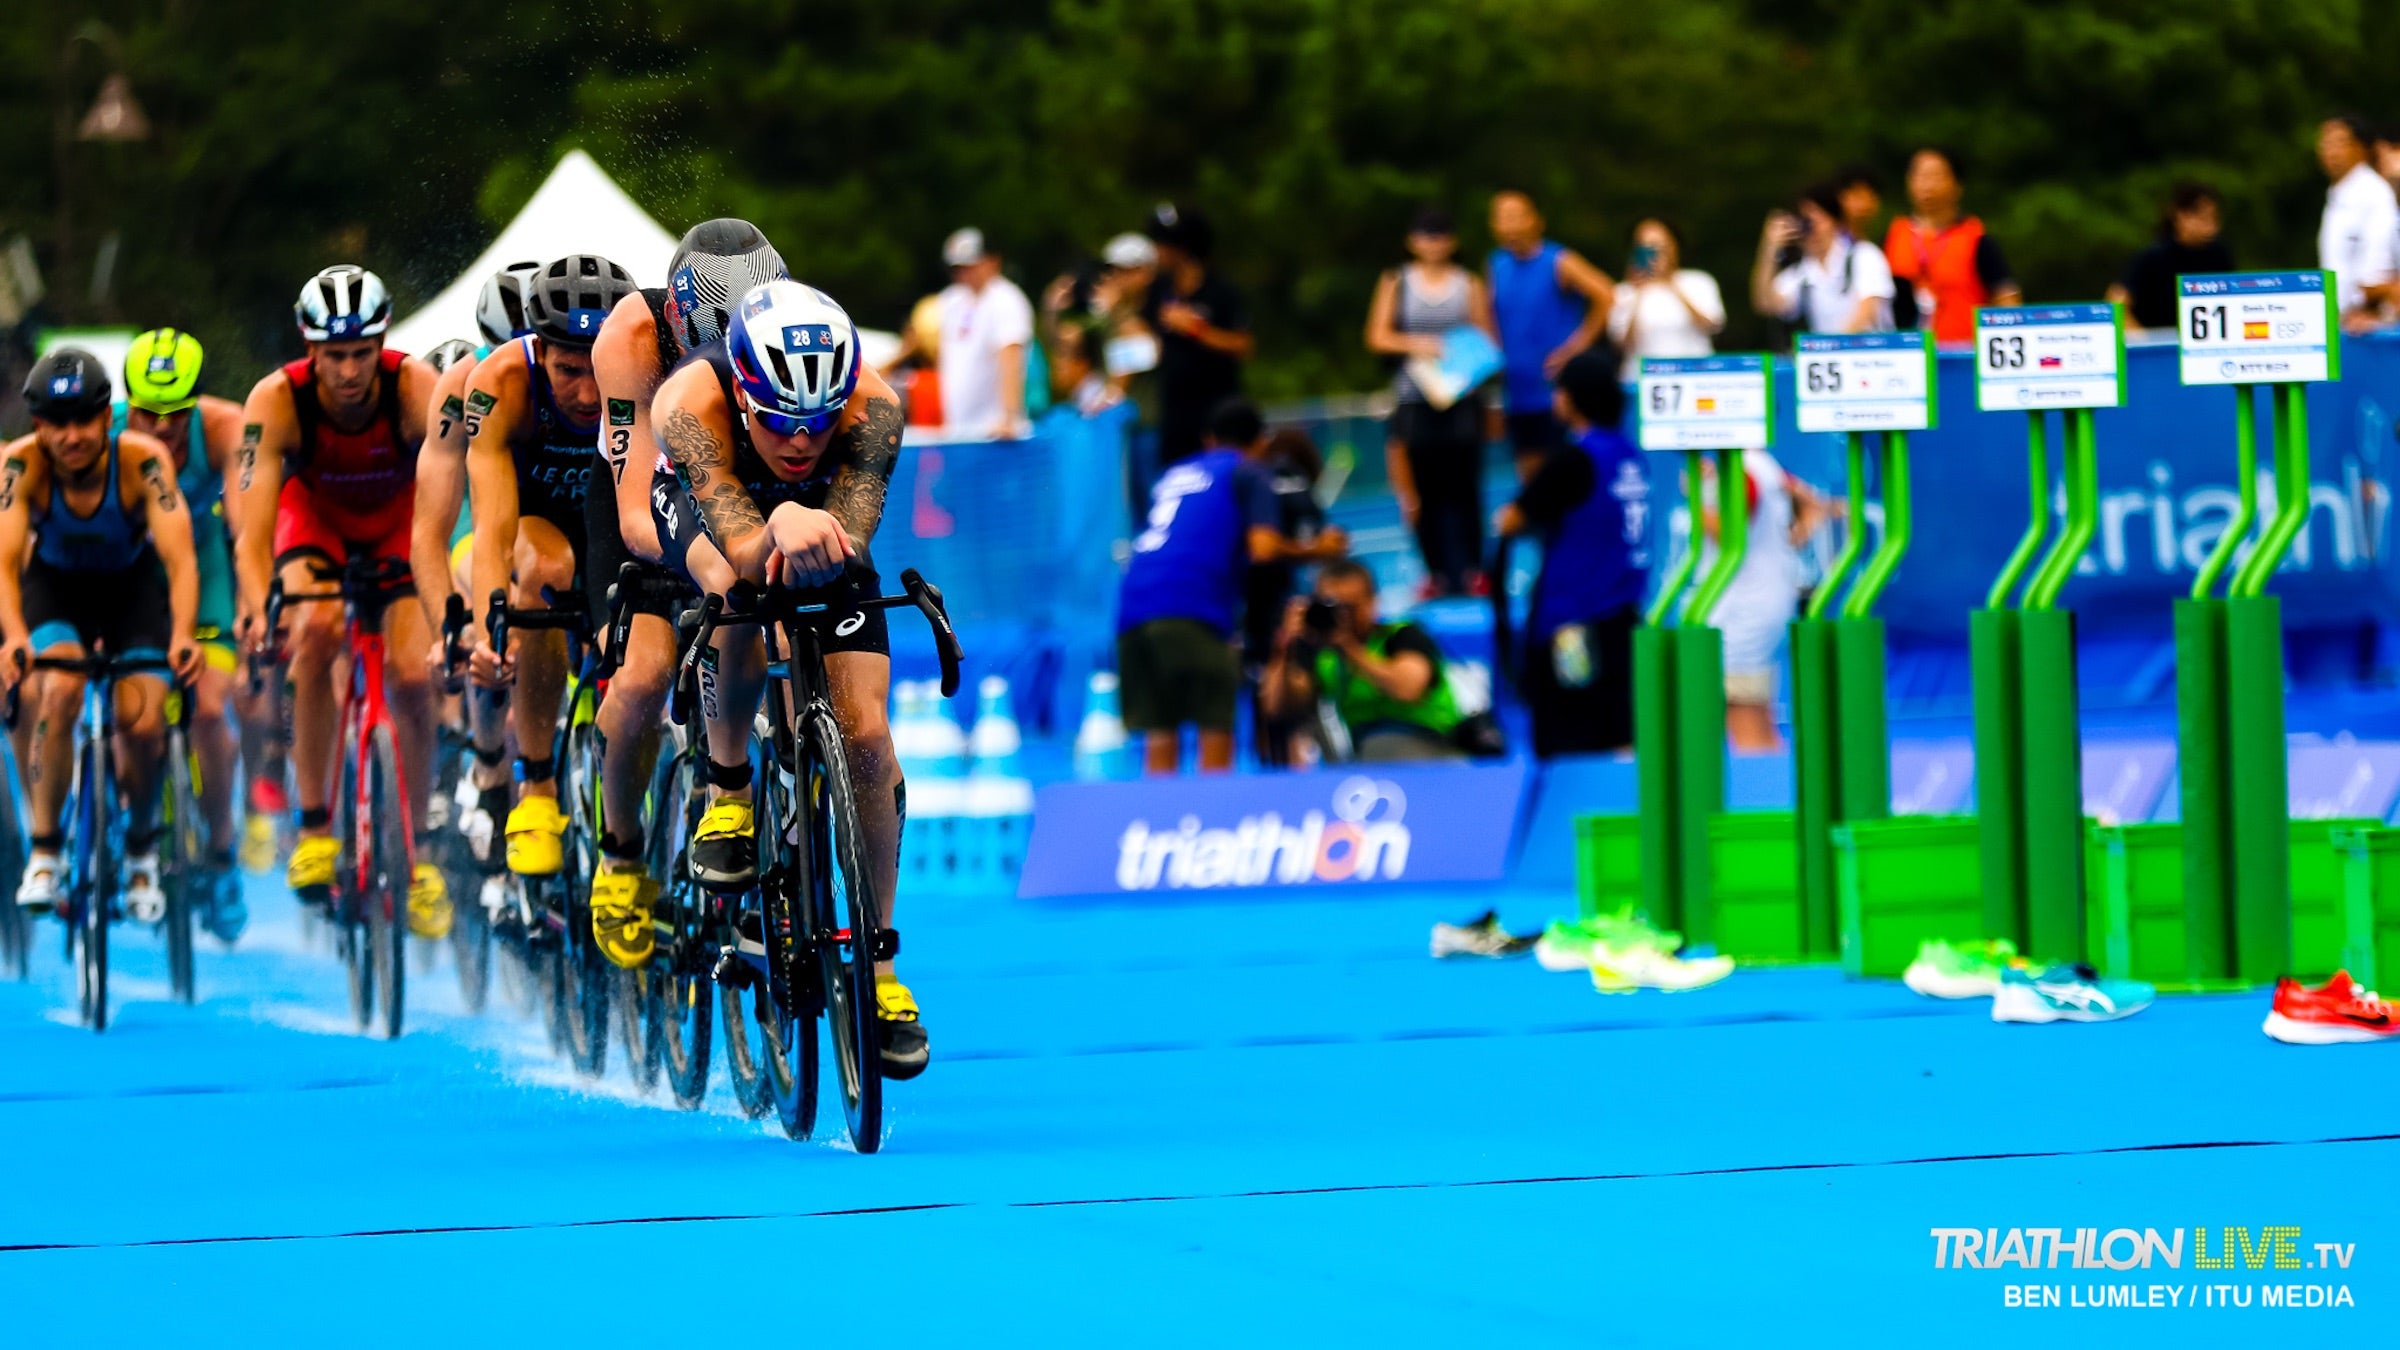 How to Watch the Olympic Triathlon Races